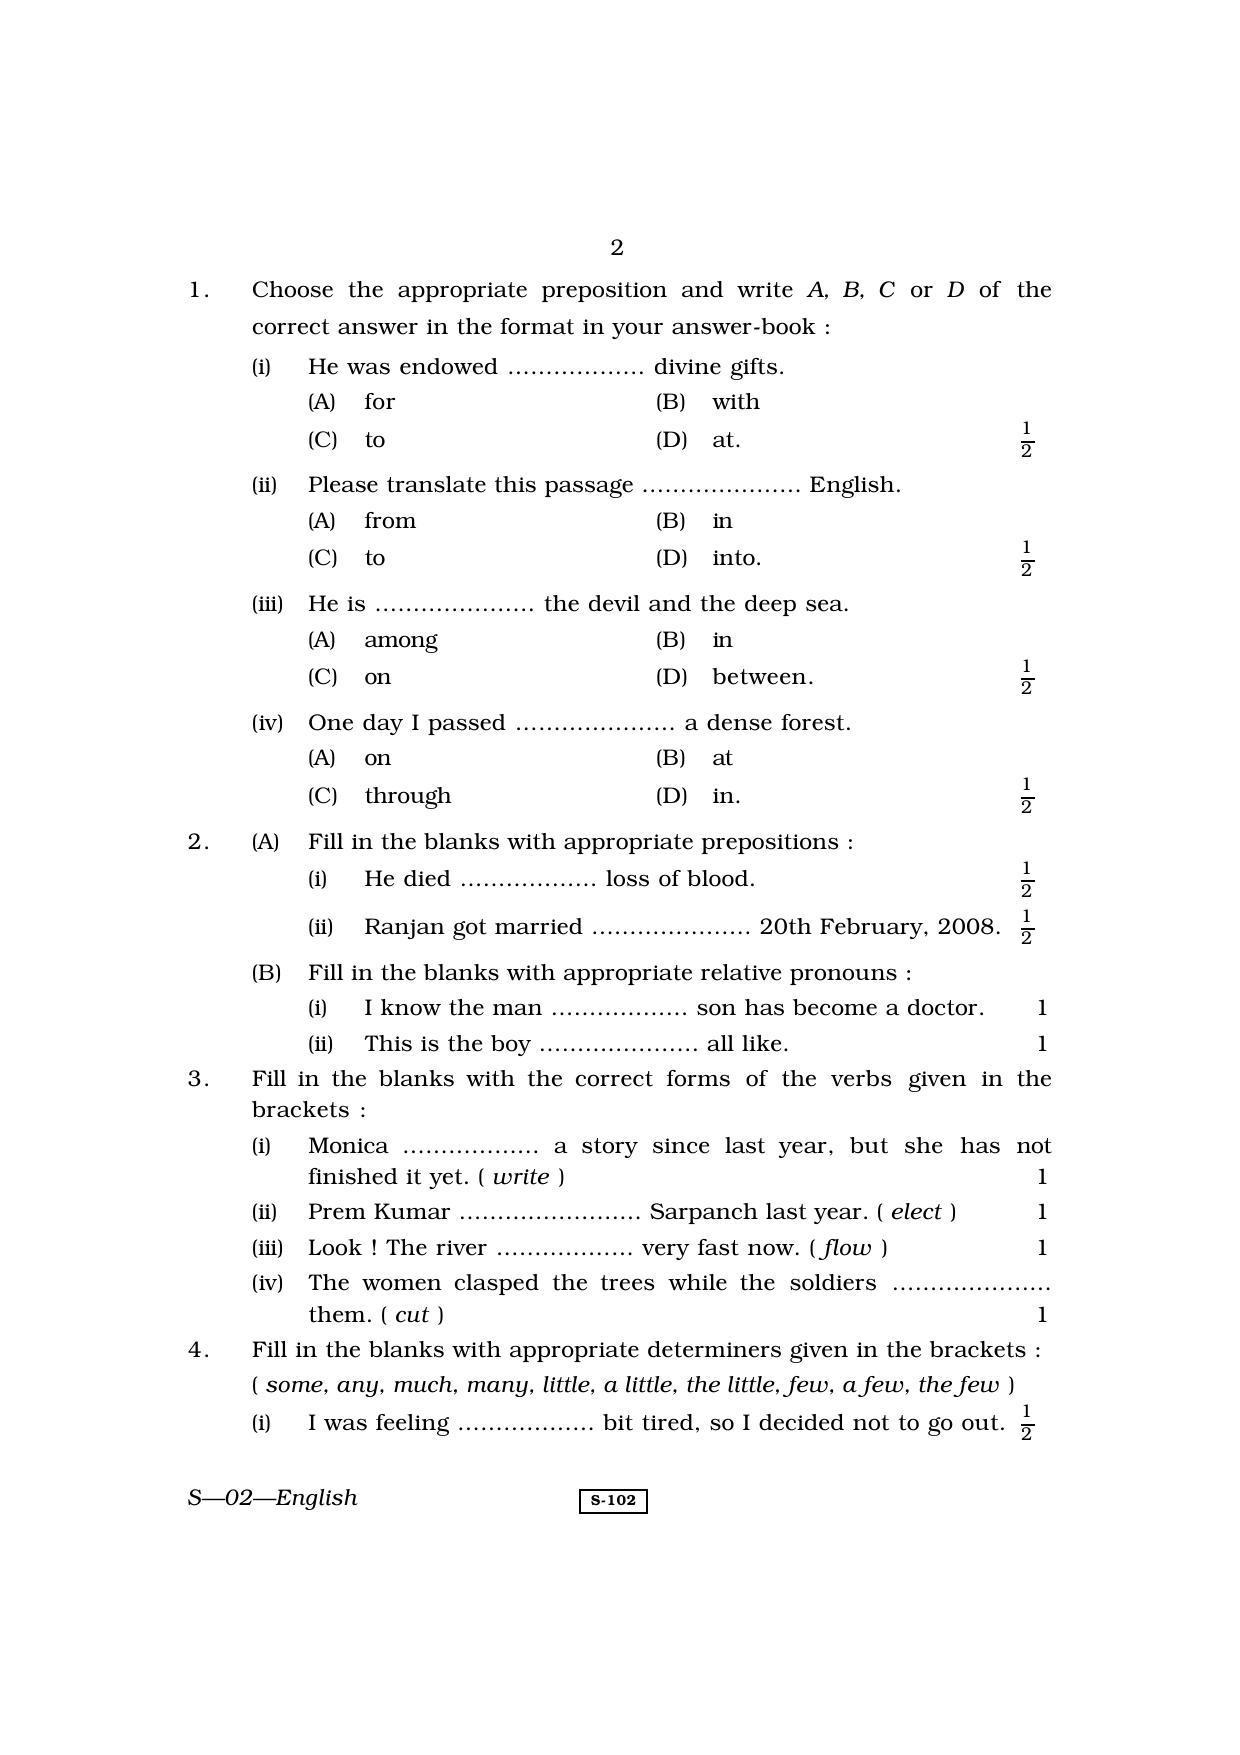 RBSE Class 10 English 2010 Question Paper - Page 2